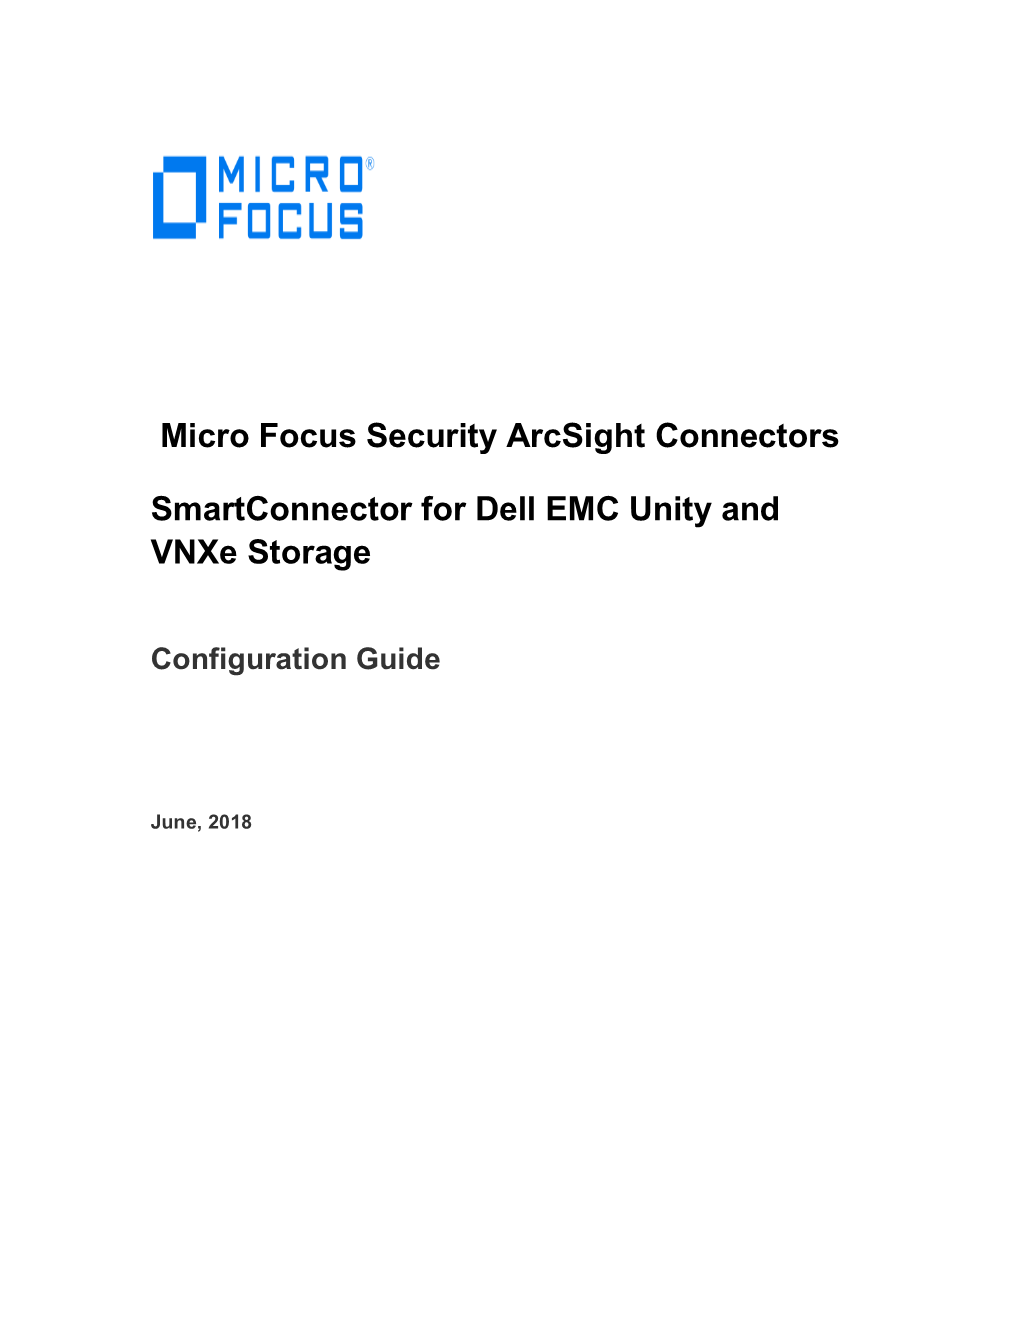 Micro Focus Security Arcsight Connectors Smartconnector for Dell EMC Unity and Vnxe Storage